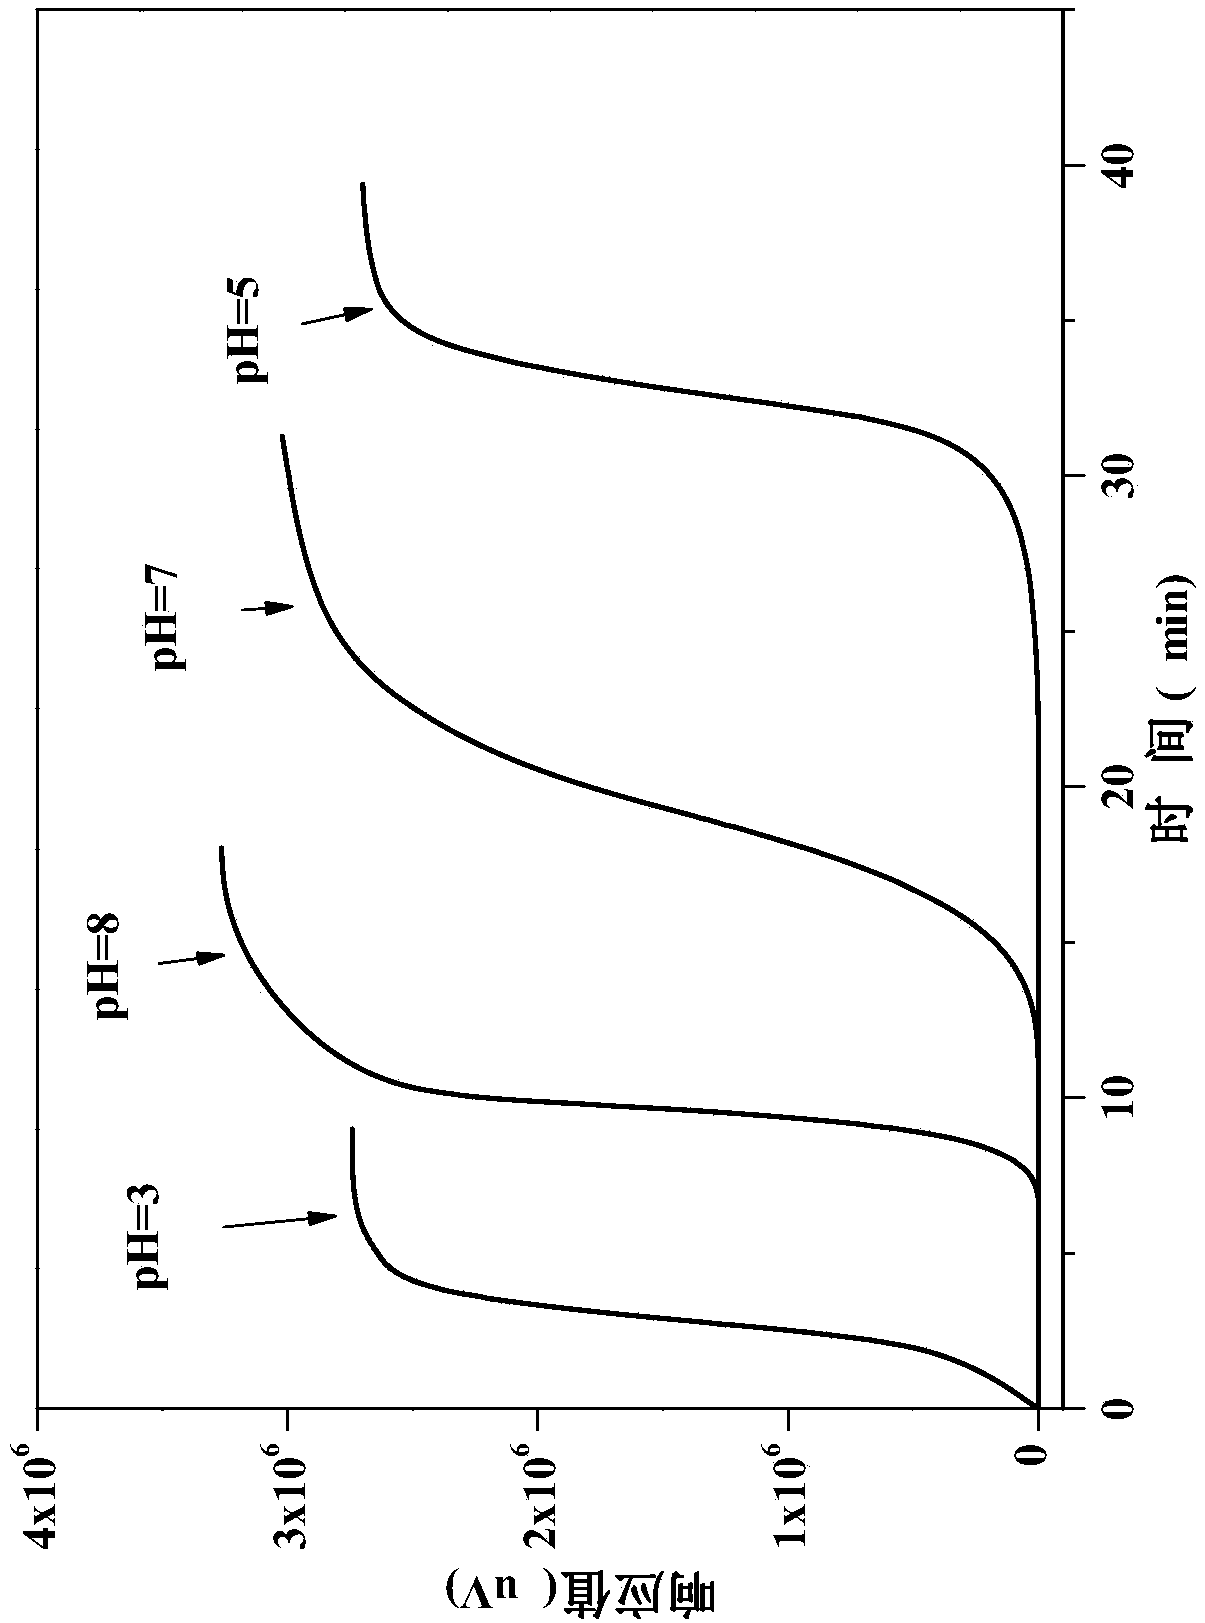 Method for simultaneous enriching and detecting quinolone antibiotics in drinking water based on SPE column